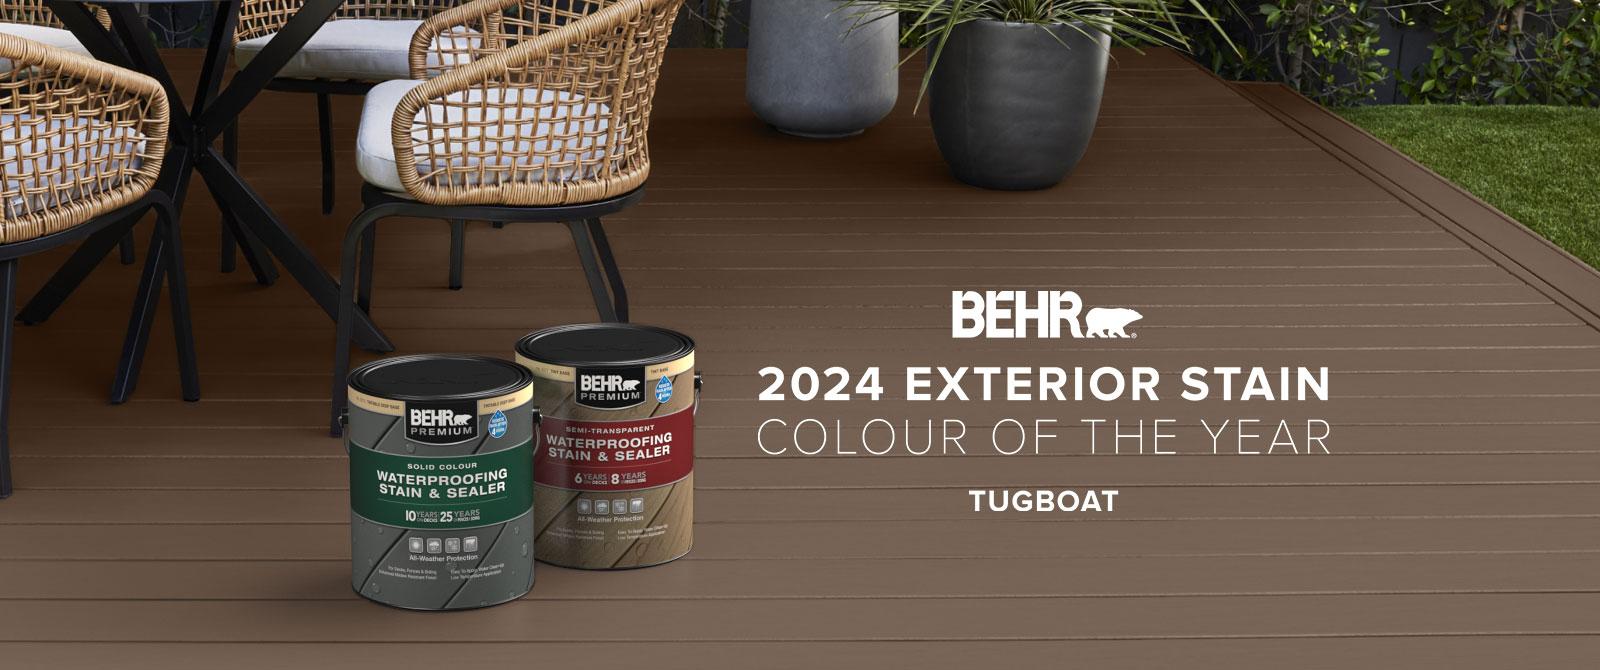 Learn more about BEHR 2024 Exterior Colour of the Year - Tugboat